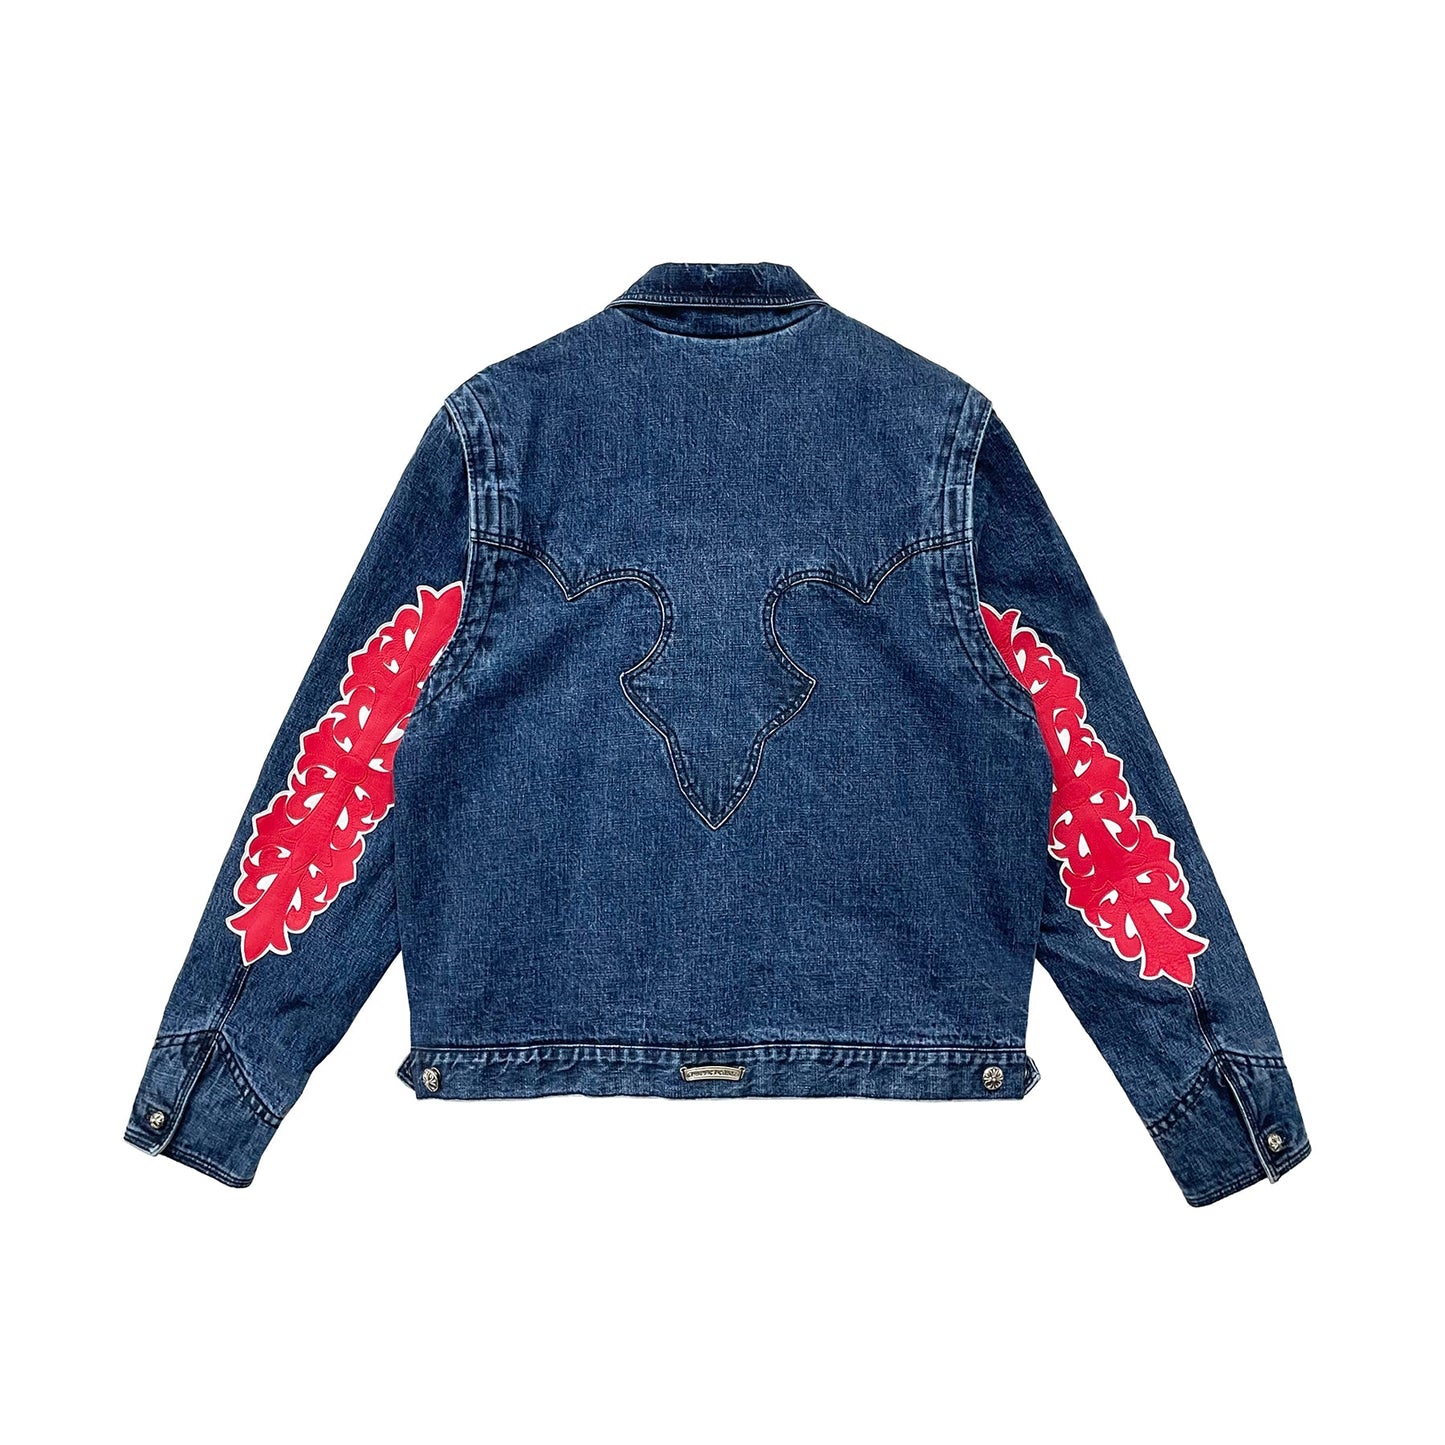 Chrome Hearts Red Floral Cross Leather Patch Denim Jacket - SHENGLI ROAD MARKET